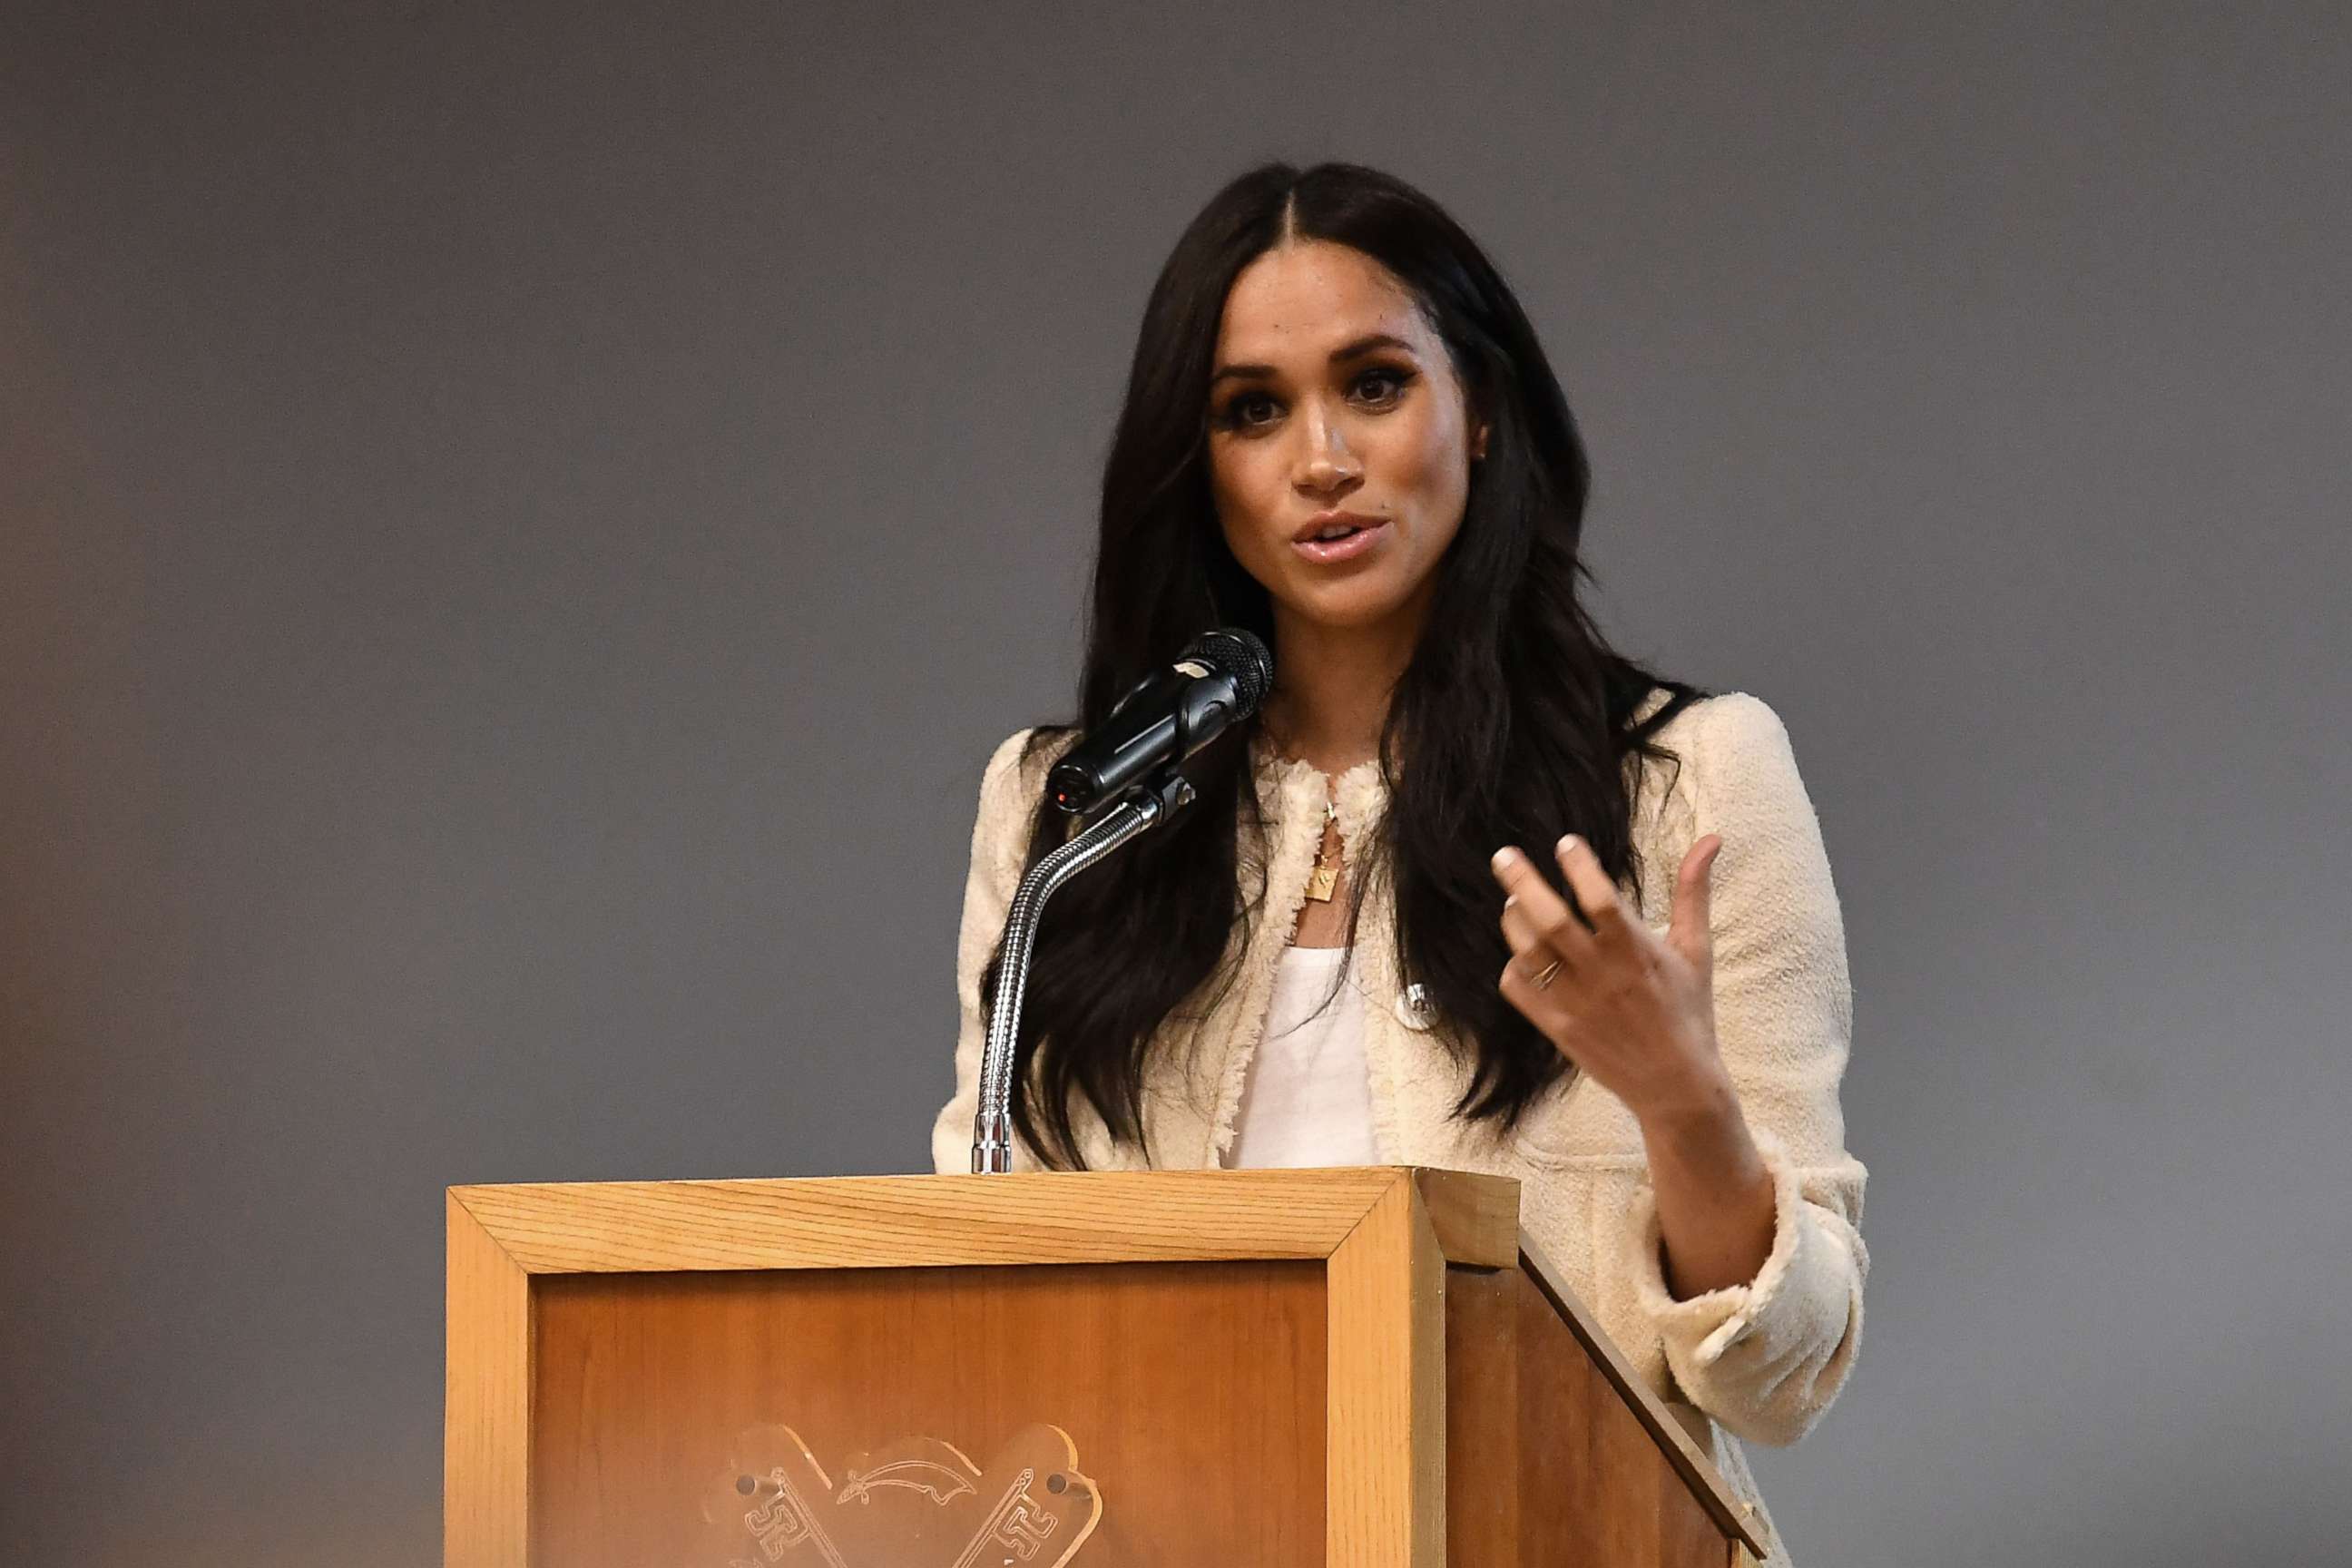 PHOTO: Meghan, Duchess of Sussex speaks during a special school assembly at the Robert Clack Upper School in Dagenham on March 6, 2020 in London, England.